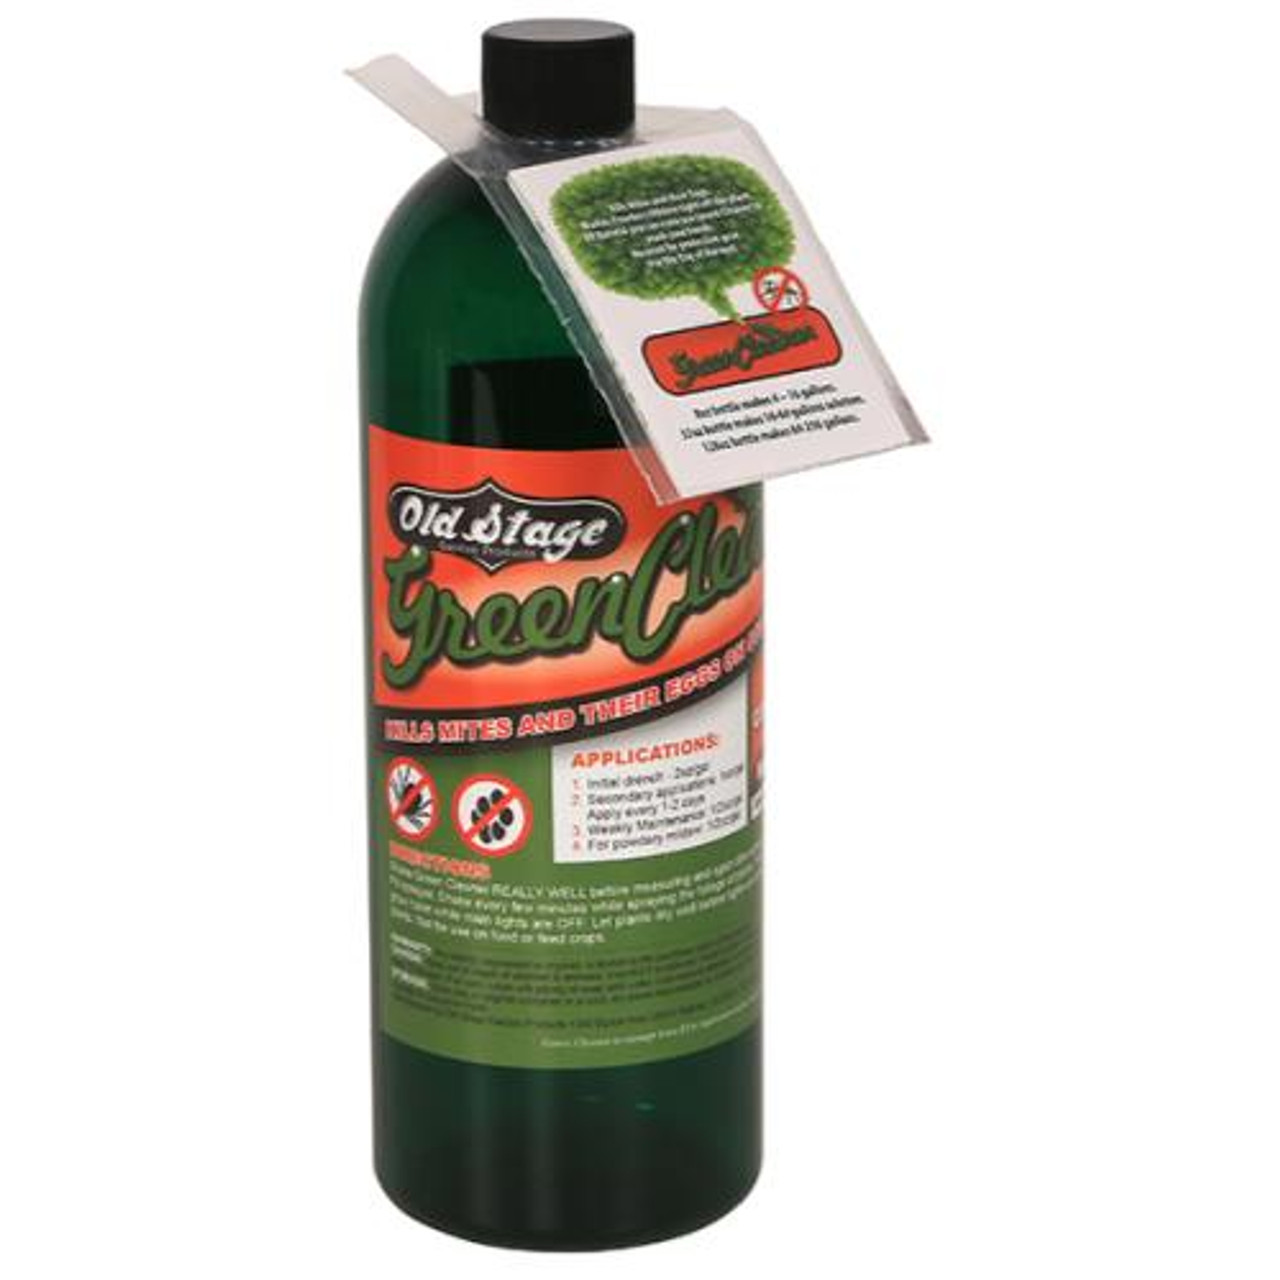 Old Stage Green Cleaner Quart